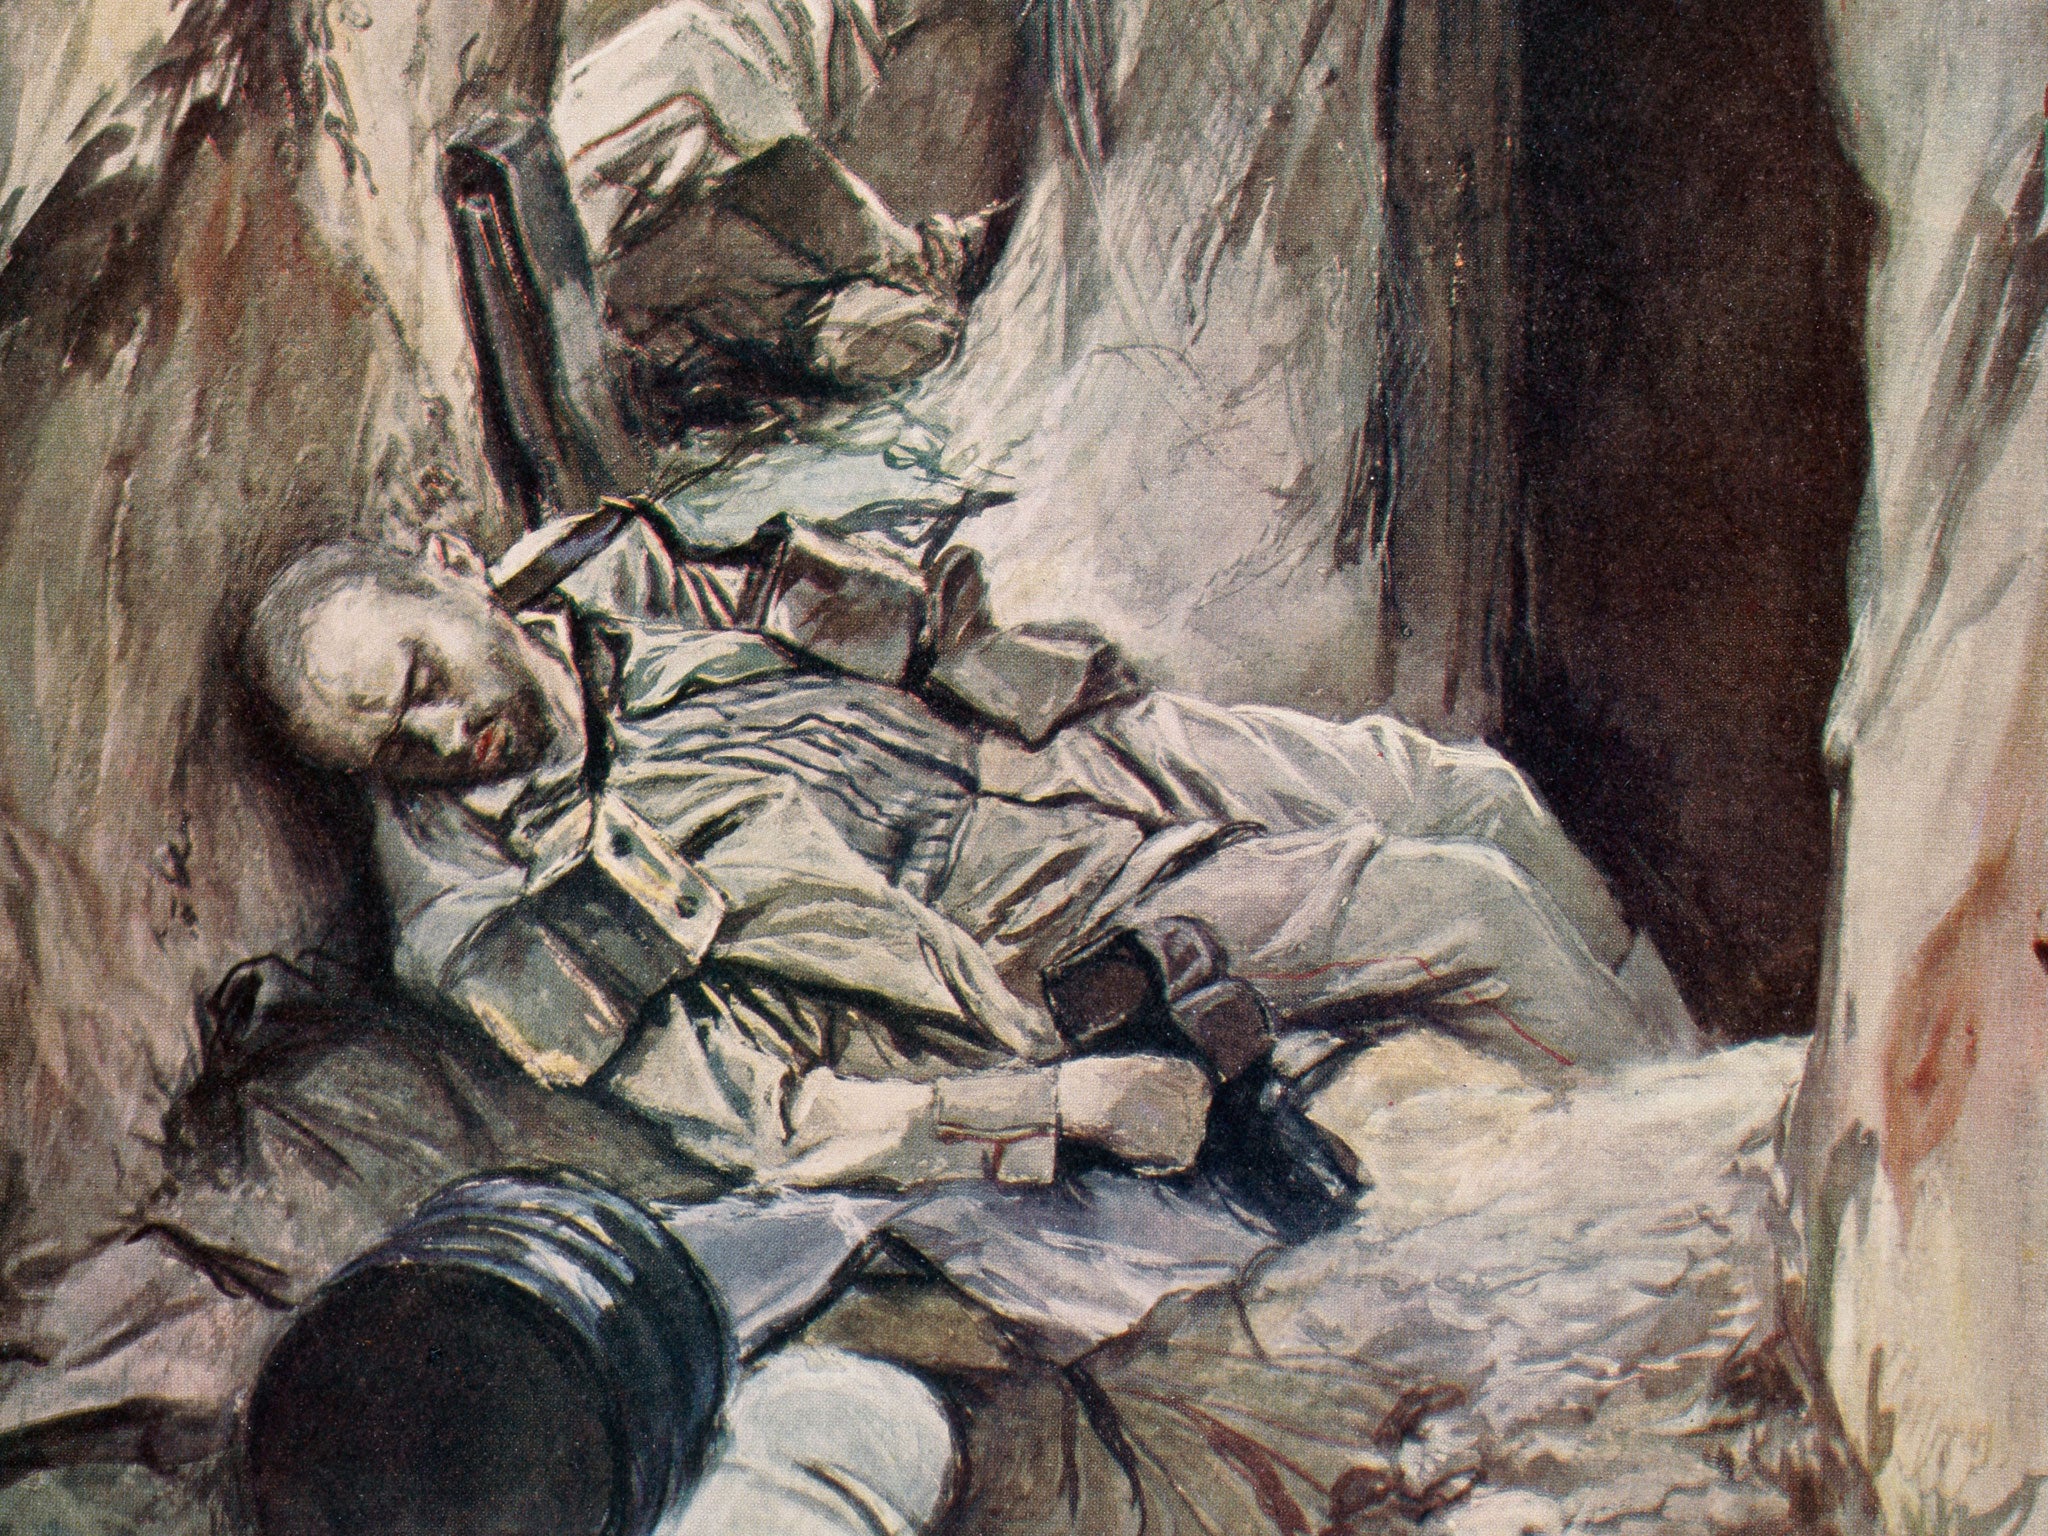 Grimm tales: An illustration showing dead German soldiers in a trench, 1916